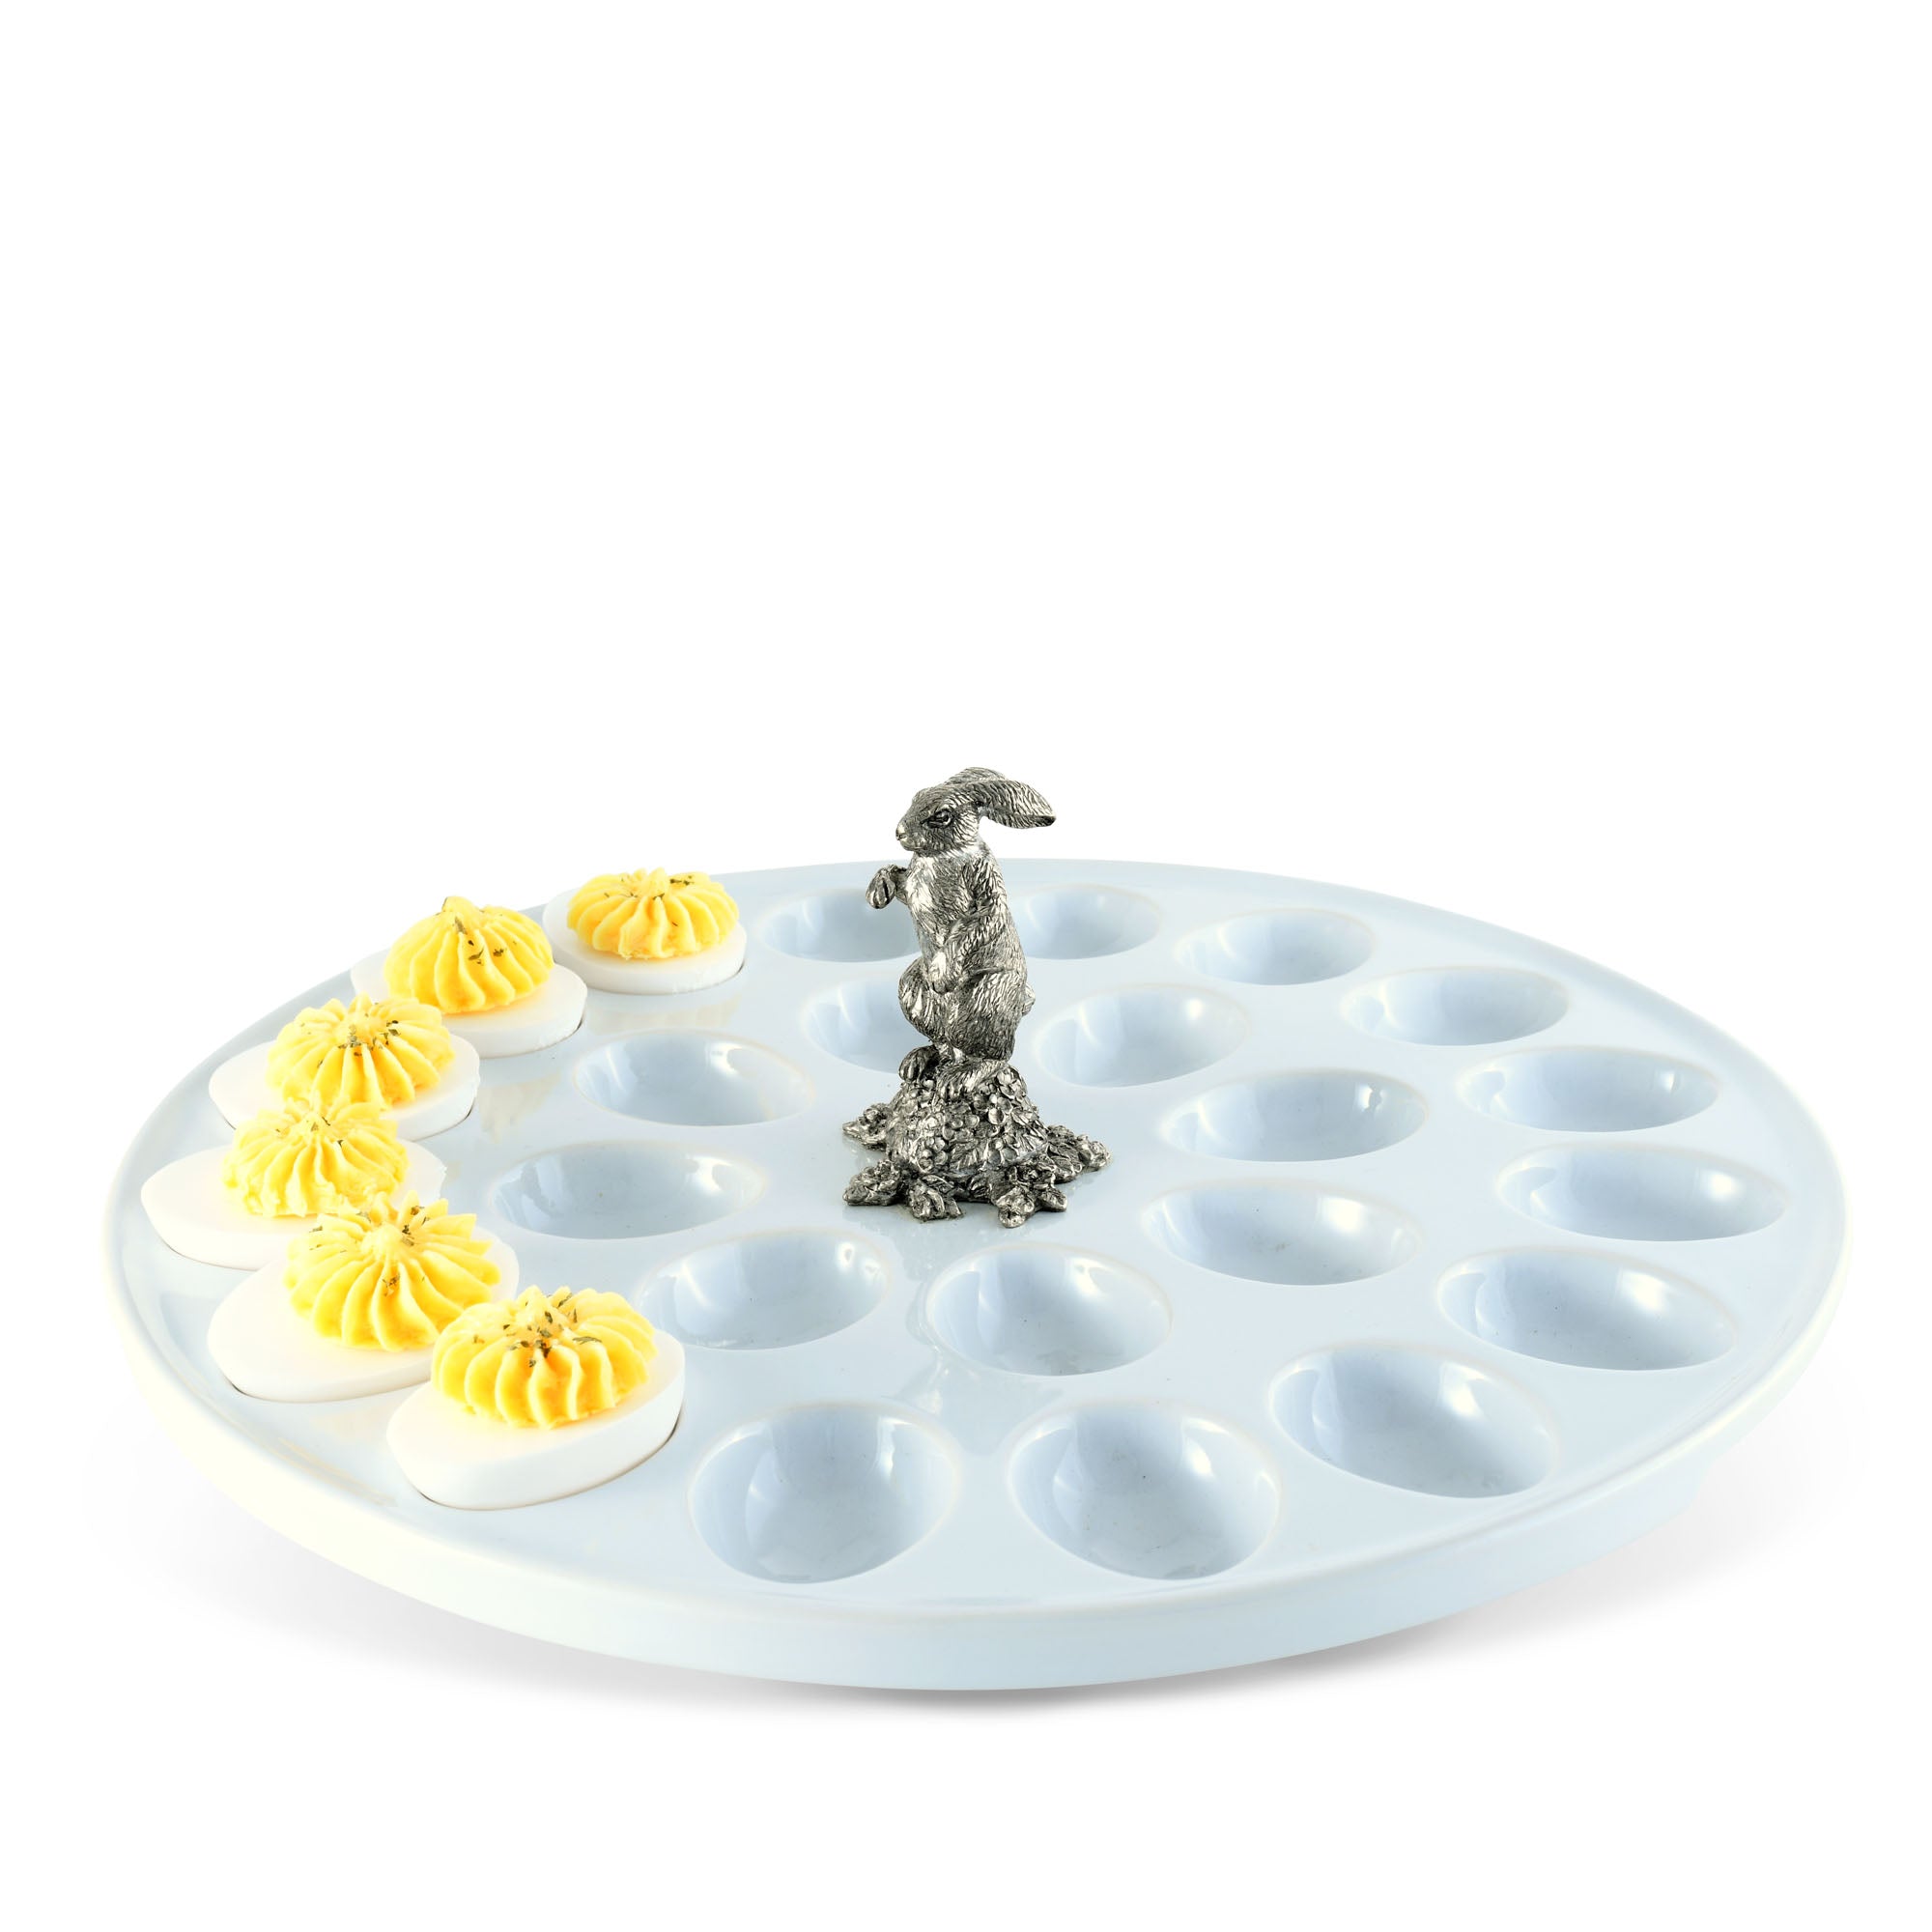 Vagabond House Deviled Egg Tray with Pewter Standing Rabbit Product Image